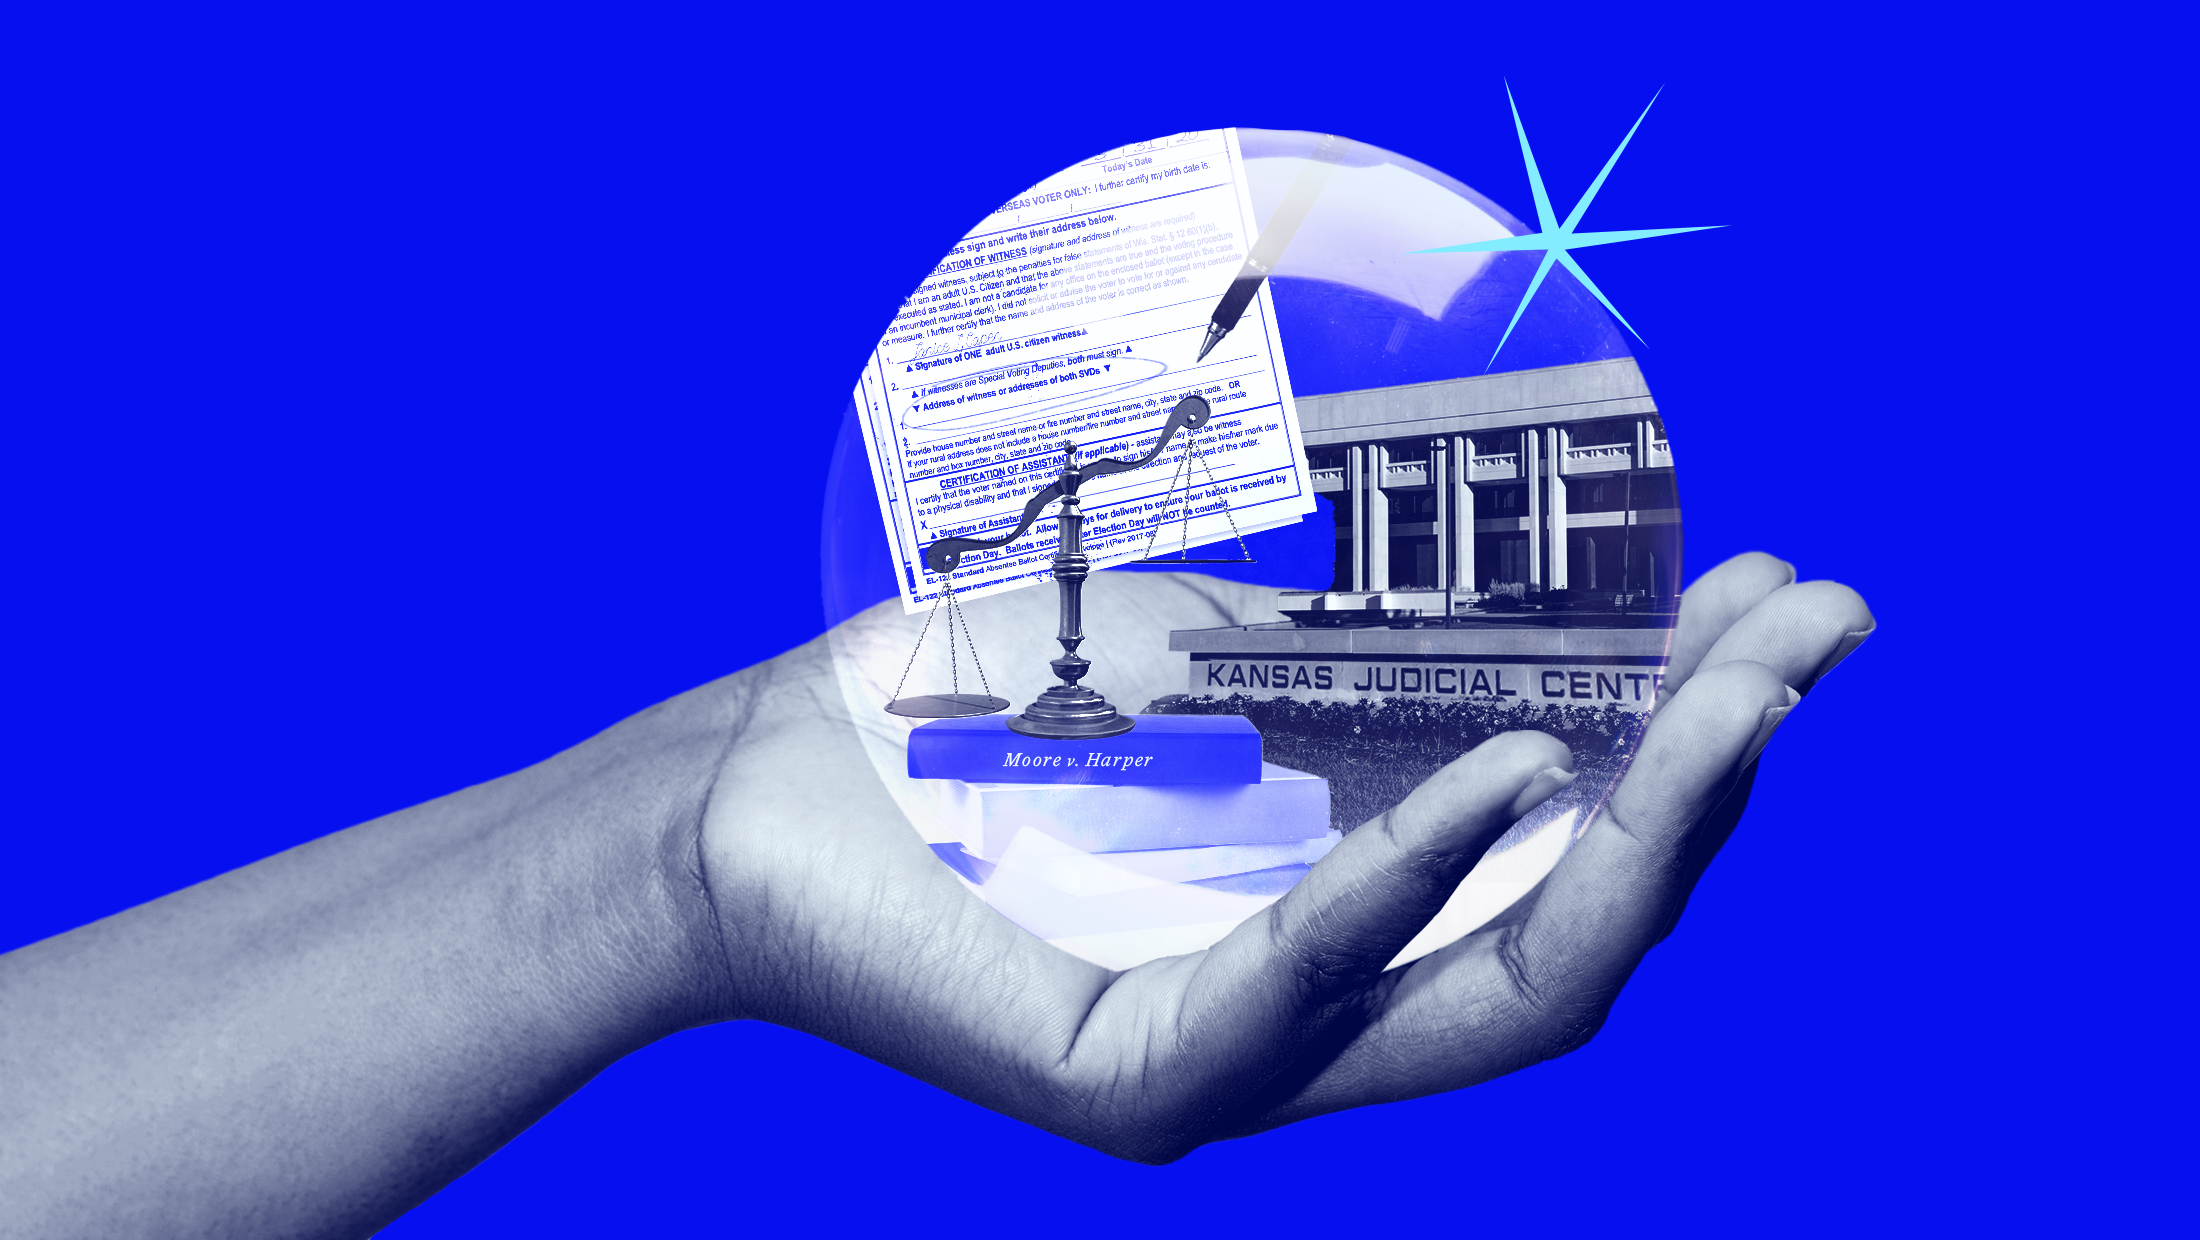 A bright blue background with a hand holding a crystal ball revealing a Wisconsin absentee ballot, a scale with "Moore v. Harper" written on it and the Kansas Judicial Center building